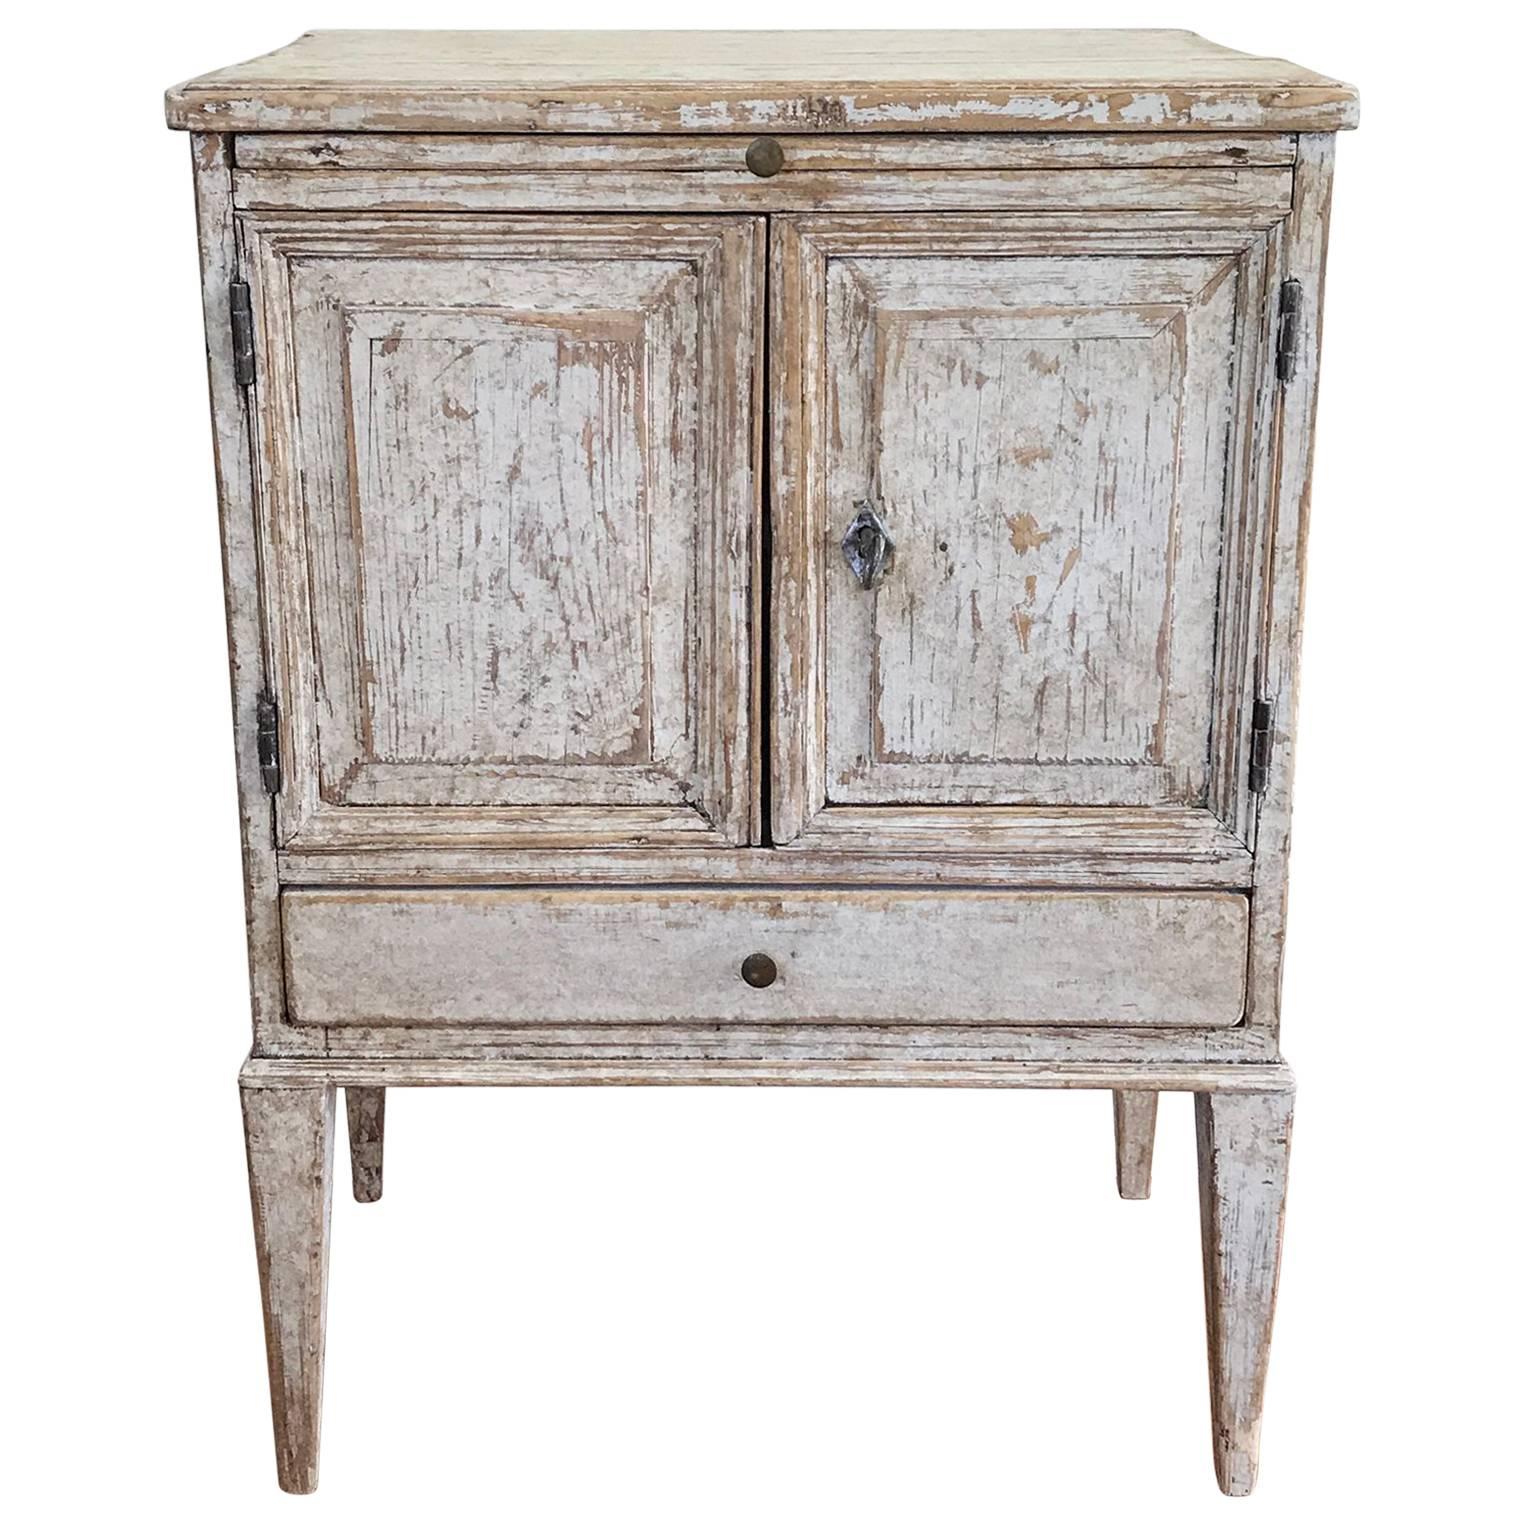 18th Century Swedish Gustavian Period Petite Bedside Table or Nightstand